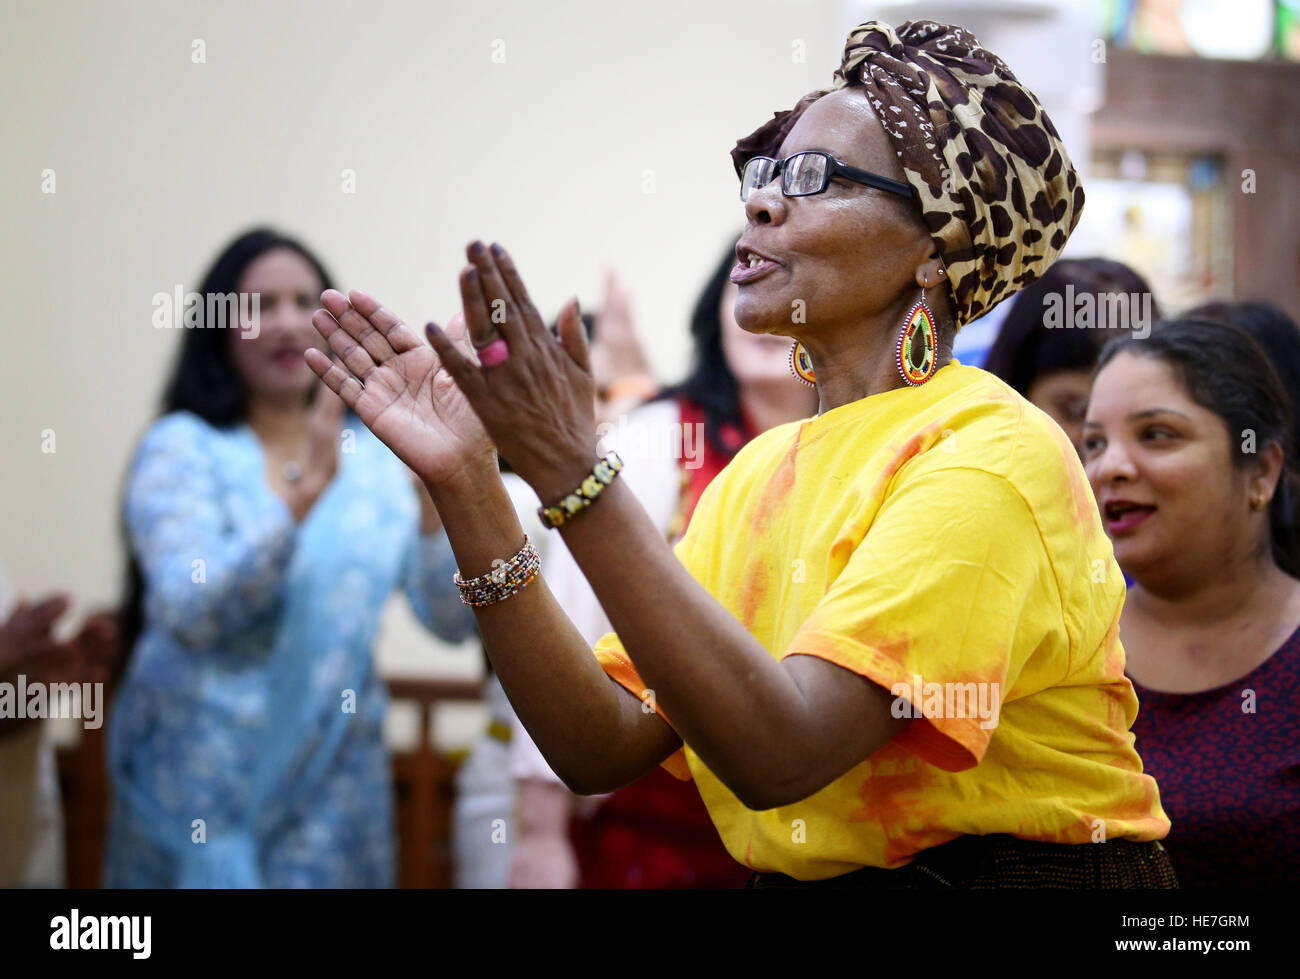 Patricia Mwatu, from Kenya, sings with the Maryhill Integration Nework's Joyous Choir during a community event at the Pollokshields Burgh Hall, Glasgow, to mark UN International Migrants Day. Stock Photo